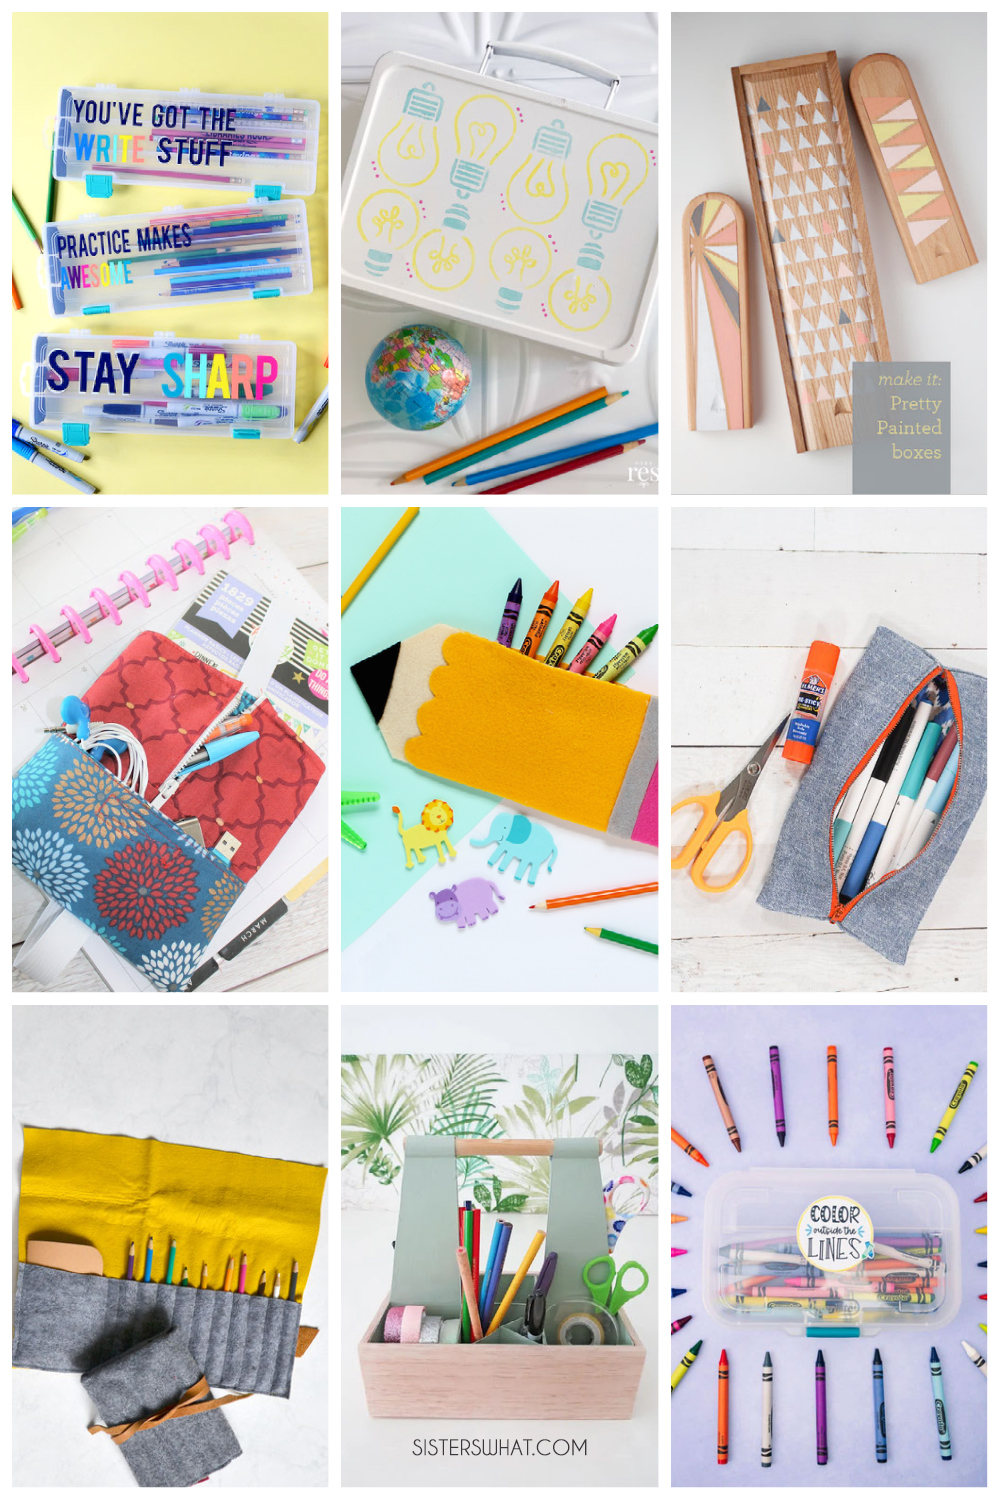 15+ DIY Pencil Cases / Holders to Make or buy - Sisters, What!